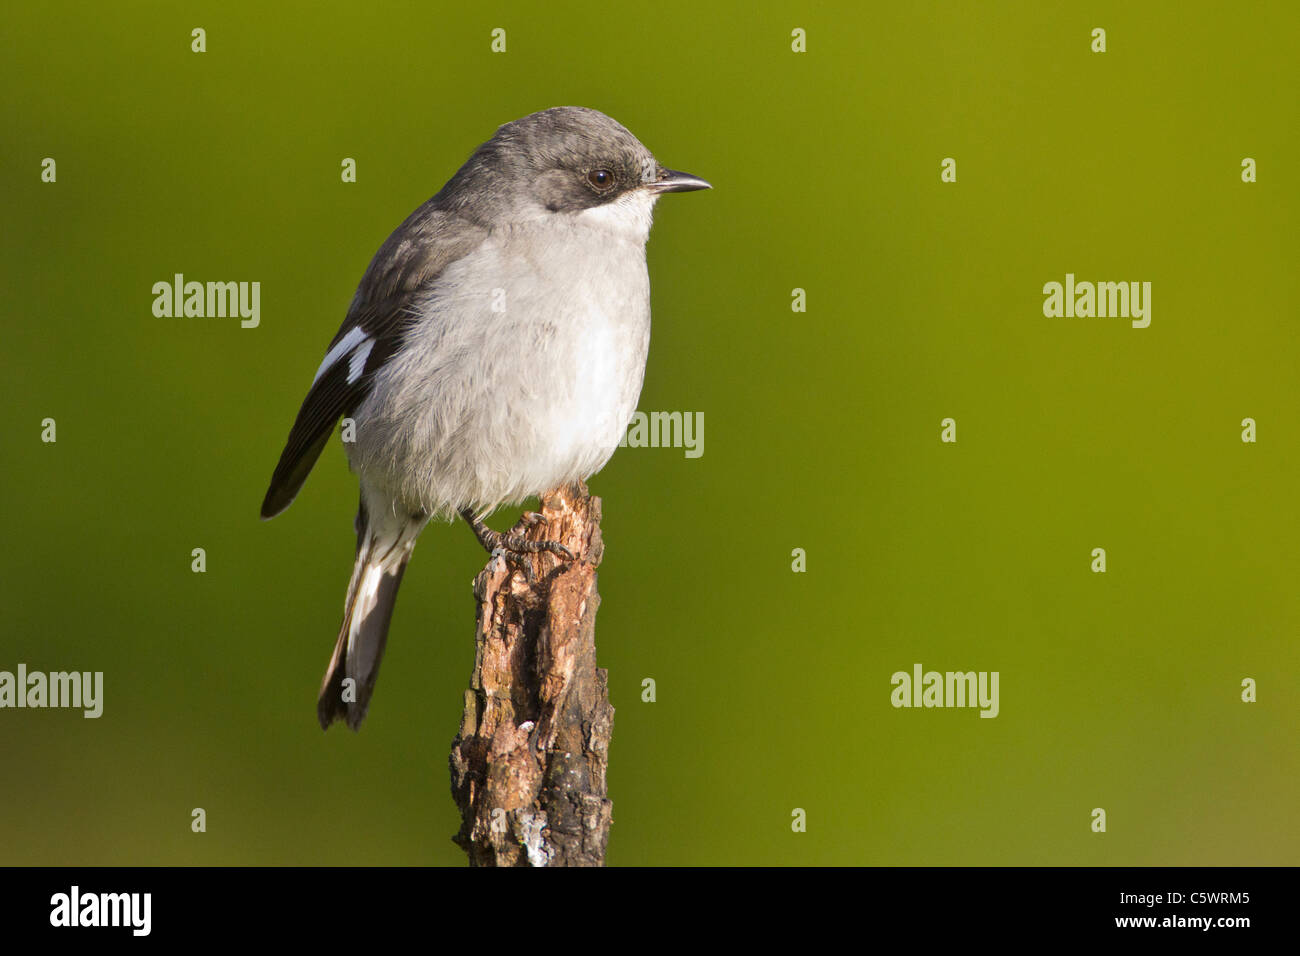 Fiscal shrike (lanius collaris) at Addo Elephant Park in South Africa. Stock Photo